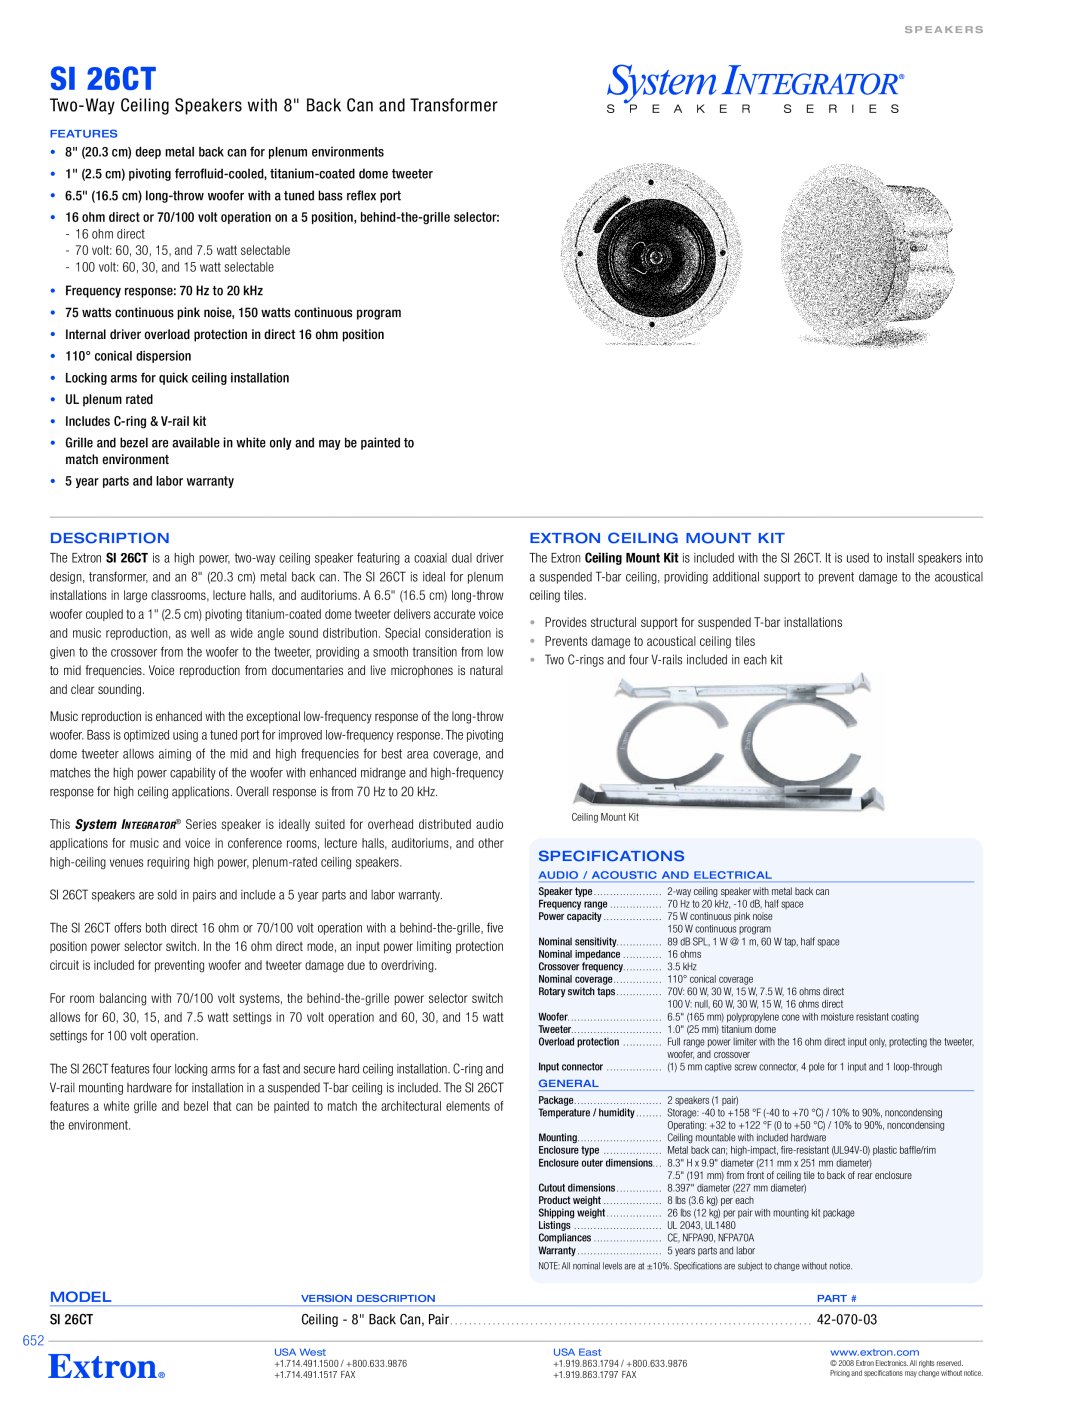 Extron electronic SI 26CT specifications User’s Guide, Ceiling Speaker, Frame Construction Ceiling Installation 